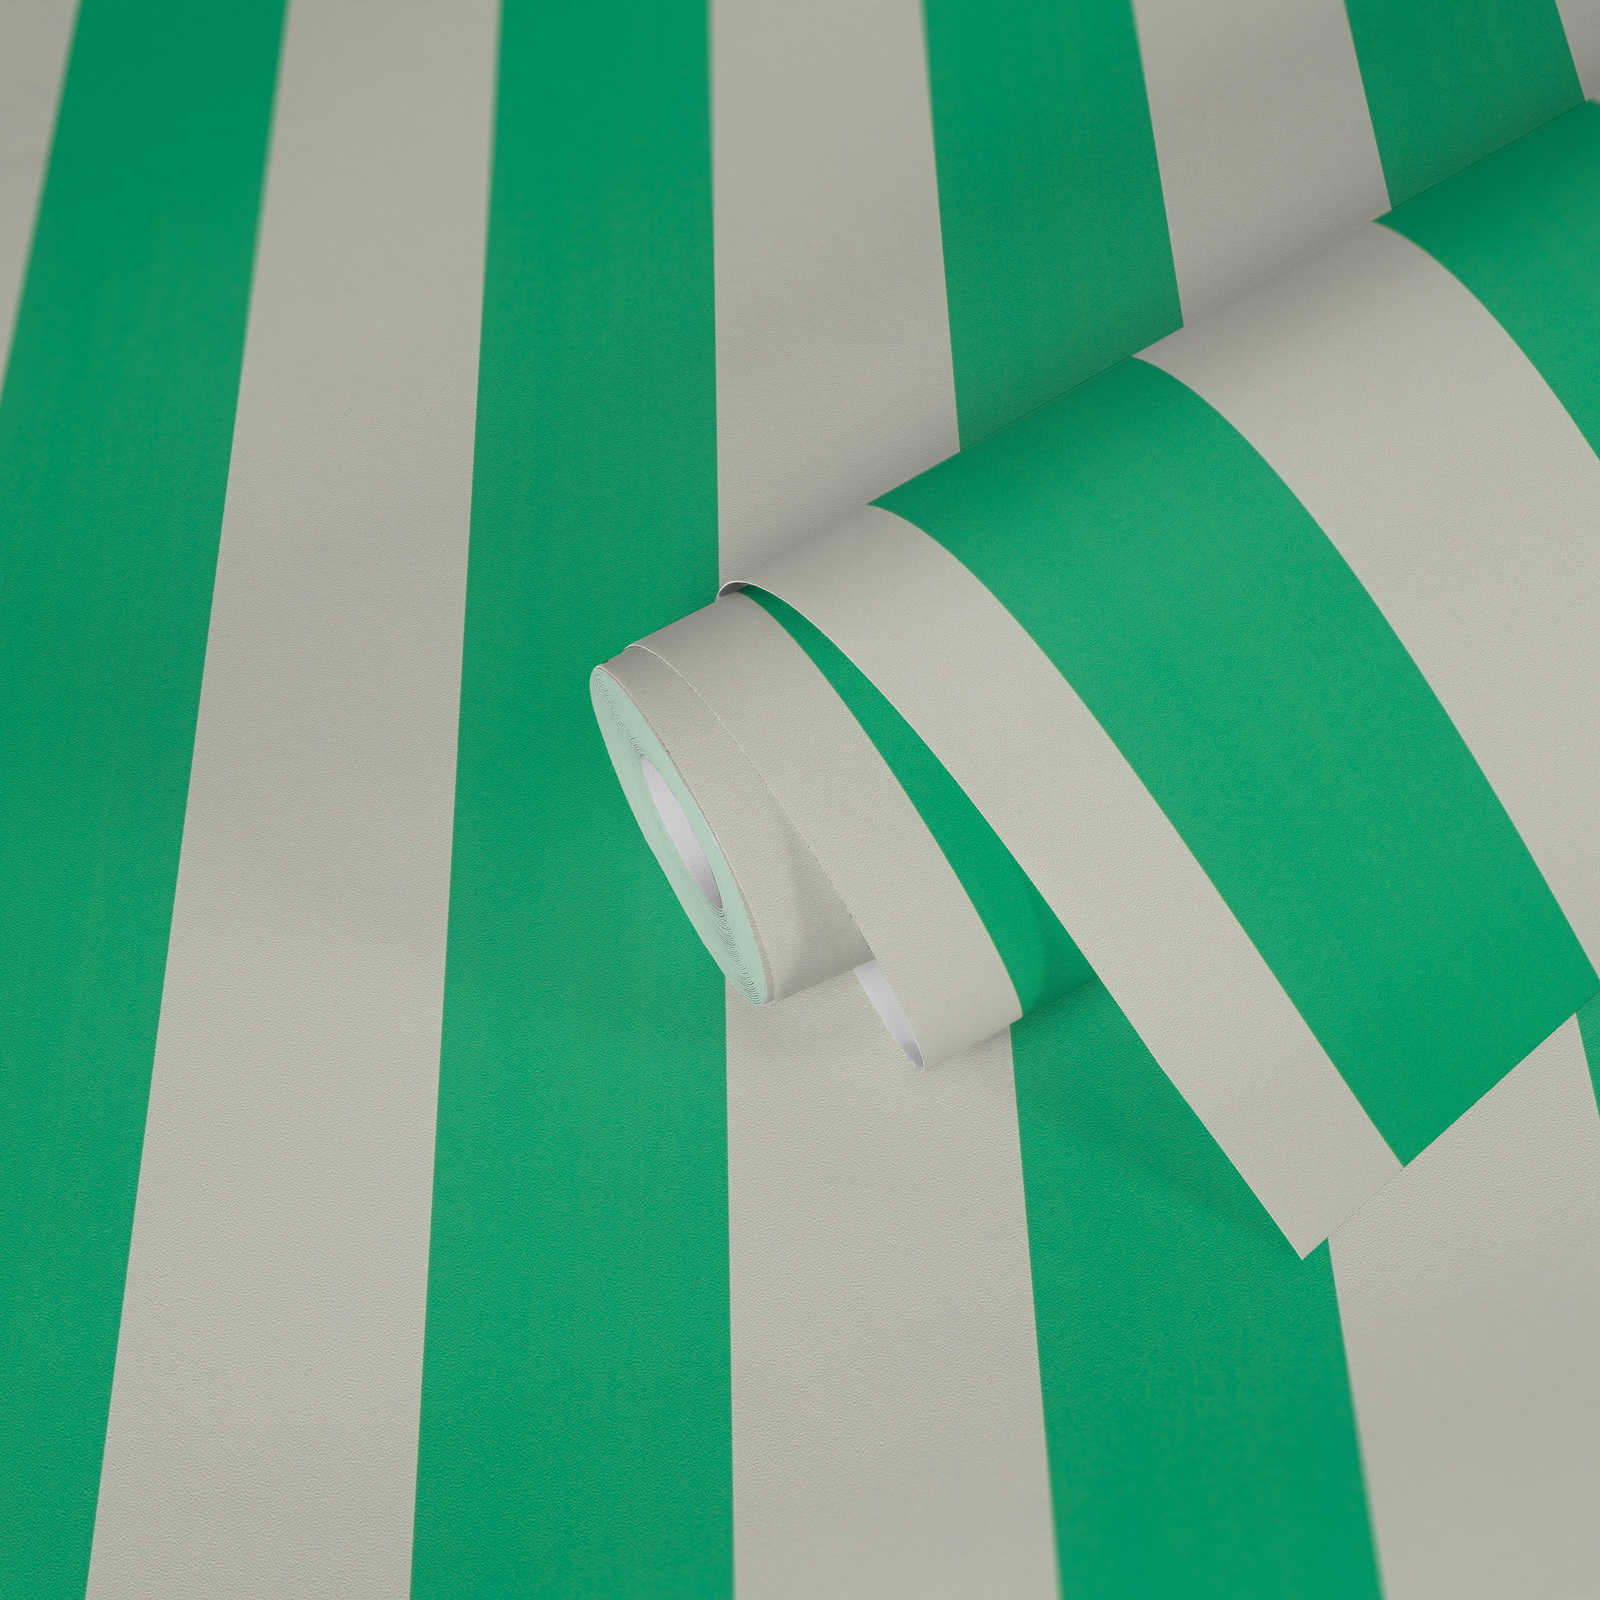             Striped wallpaper with light structure - green, white
        